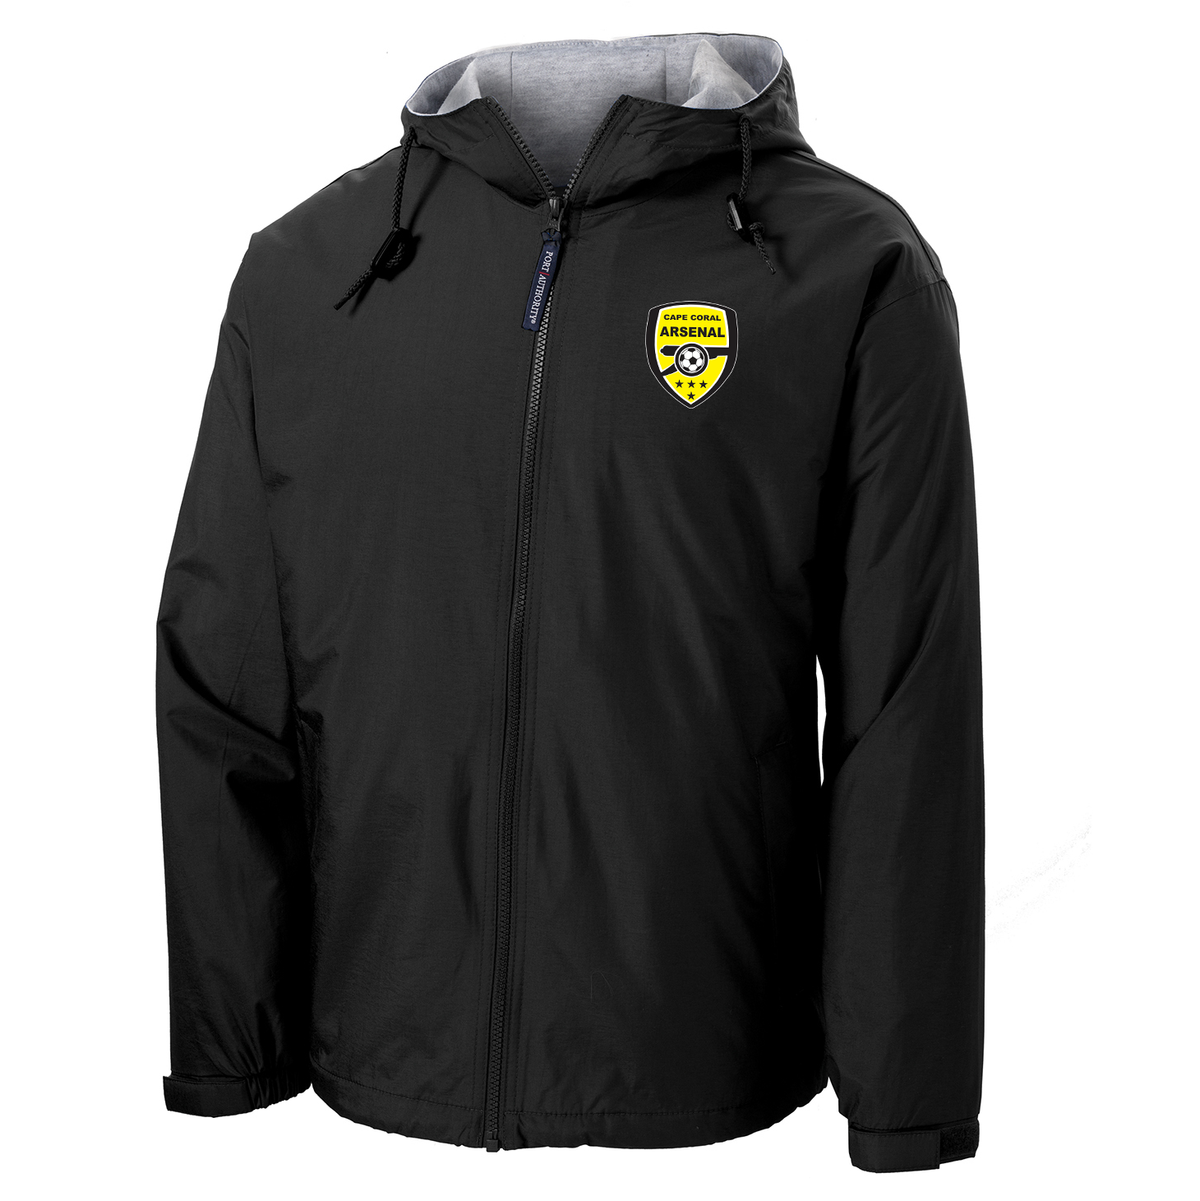 Cape Coral Arsenal Hooded Jacket